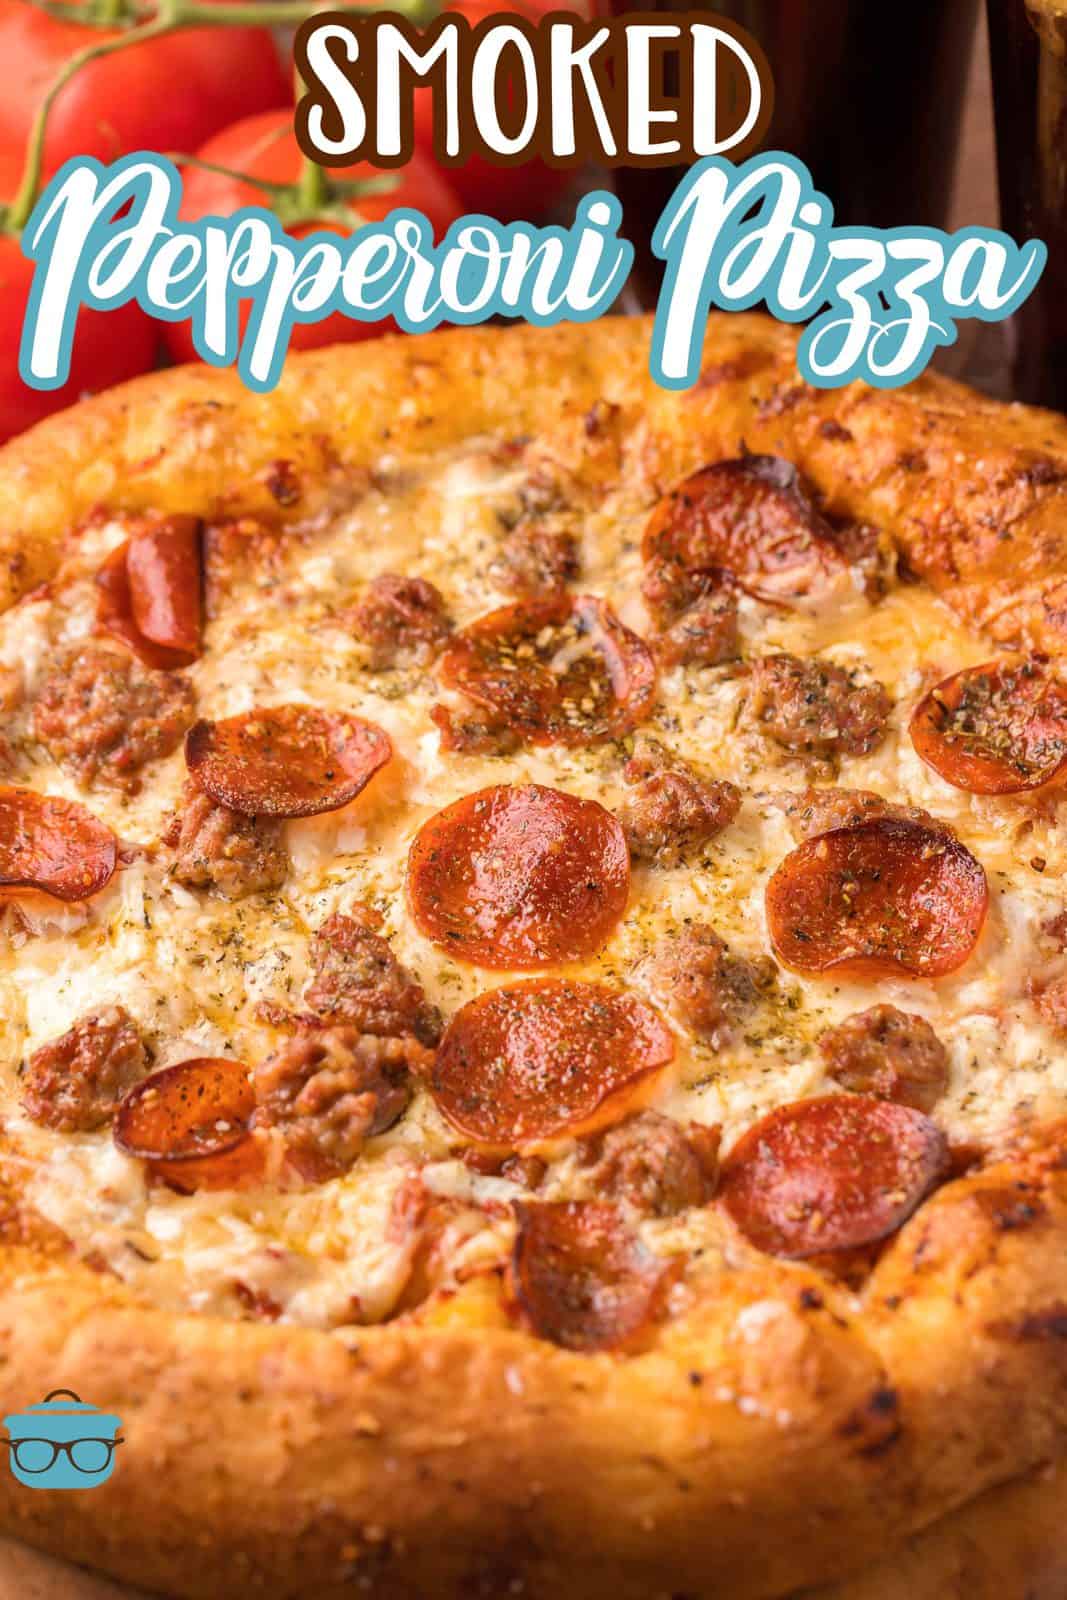 Pinterest image of Smoked Pepperoni Pizza close up showing toppings.